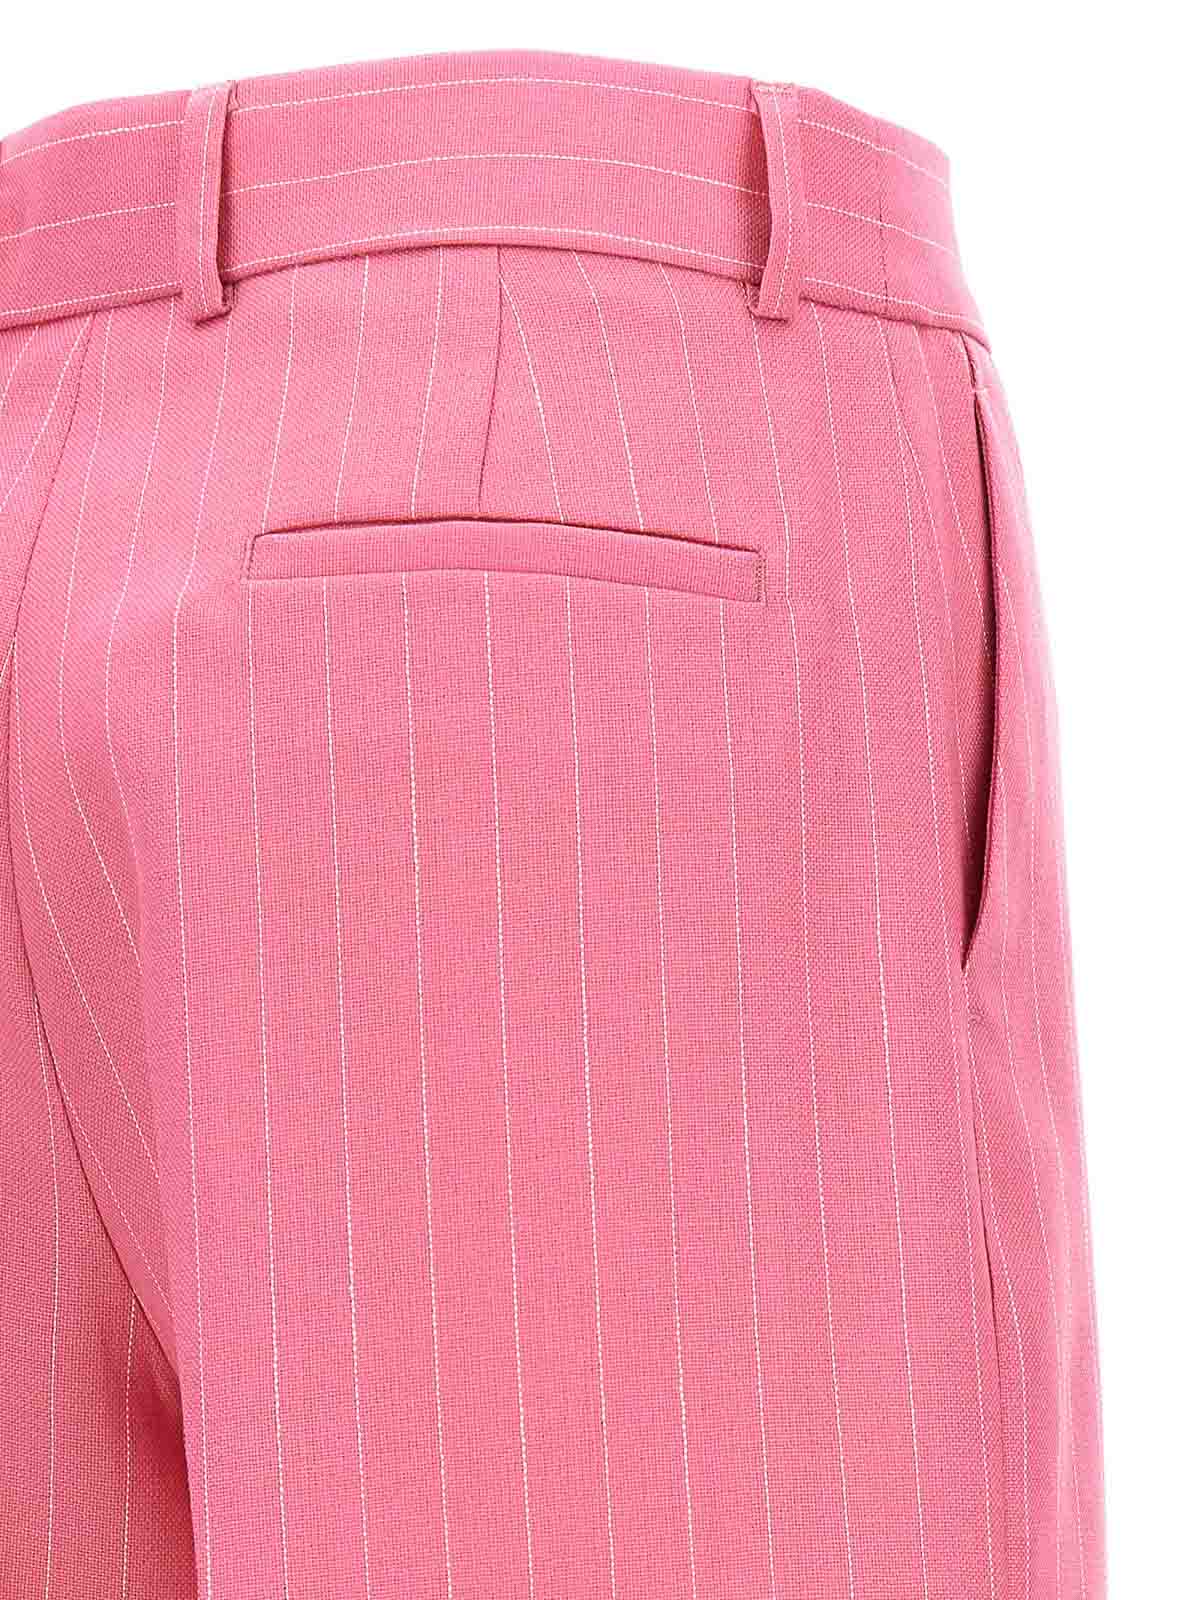 RLX Golf Shorts - Cypress Tailored Pinstripe - French Navy SS23